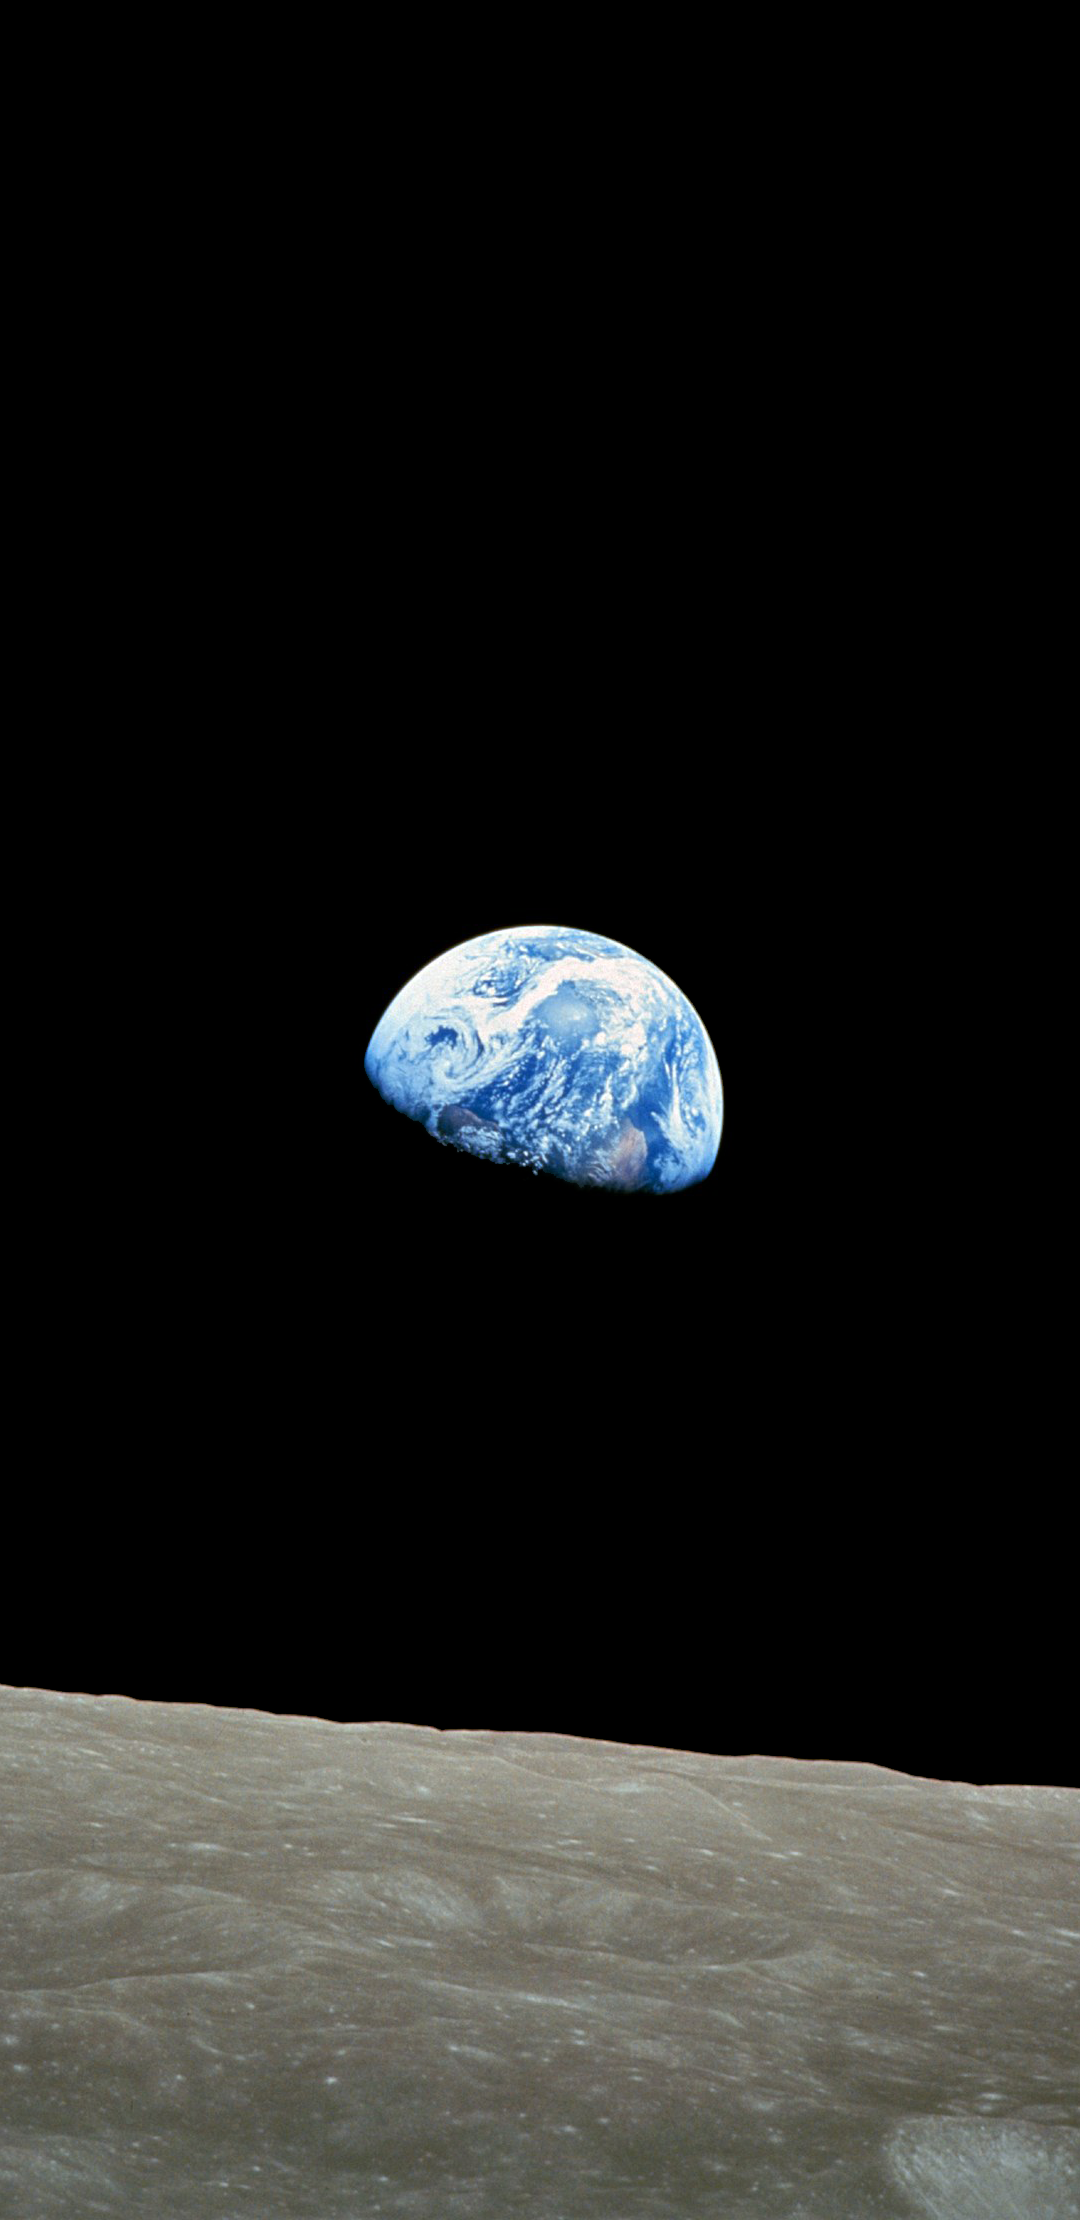 Earthrise for Samsung S8 - [1080x2220]